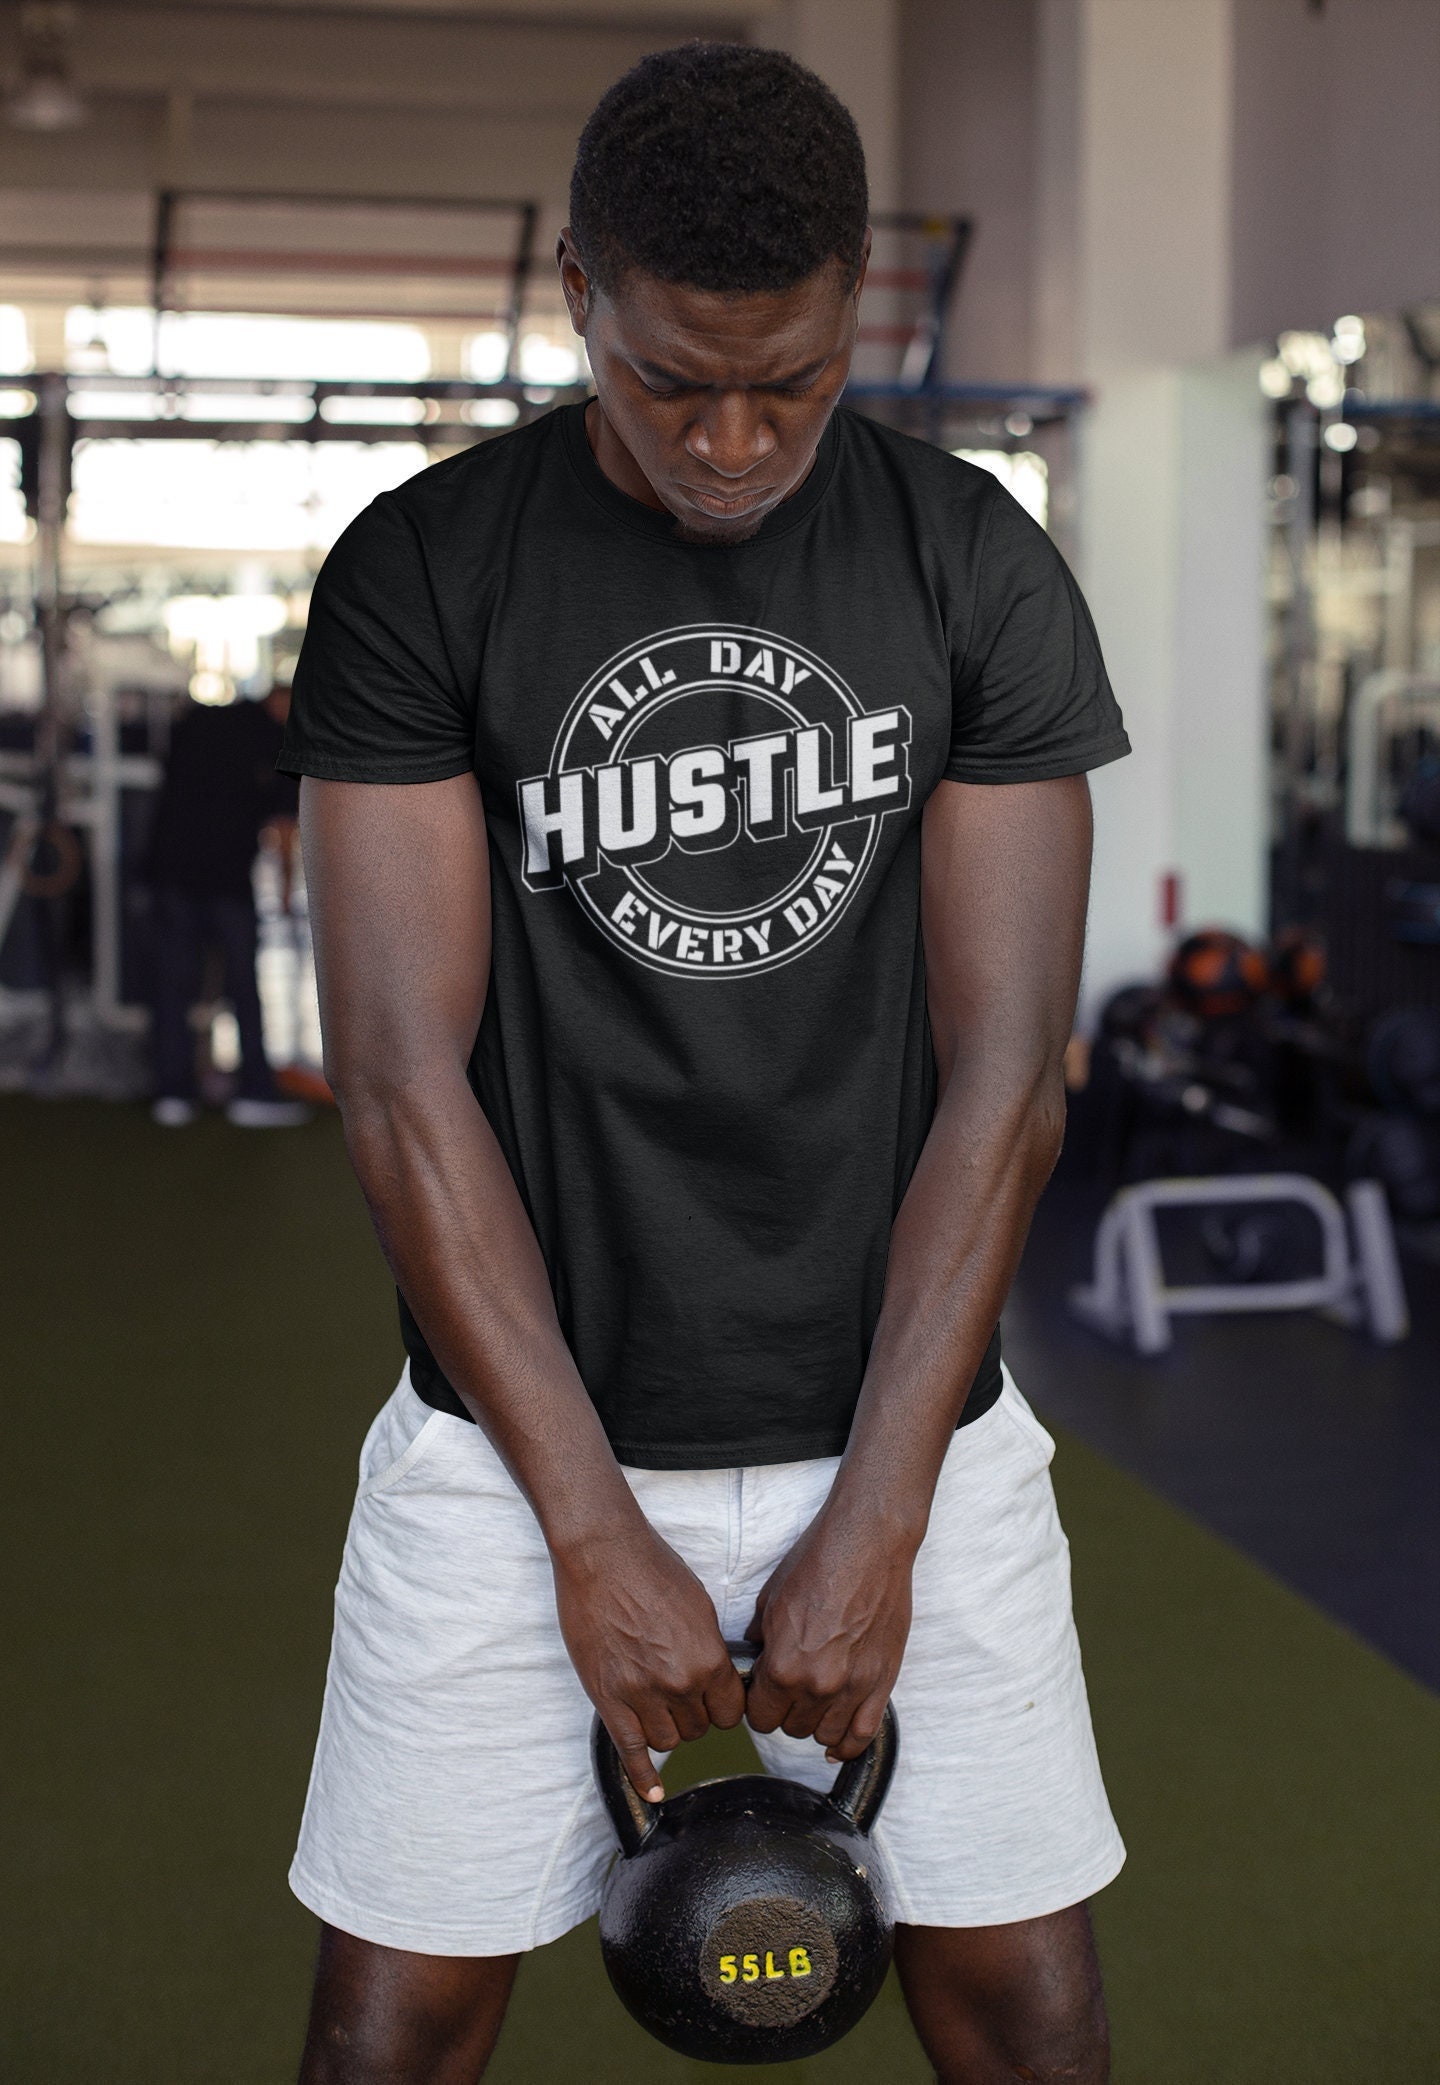 Hustle All Day Every Day Graphic Tee, Entrepreneur Tshirt 